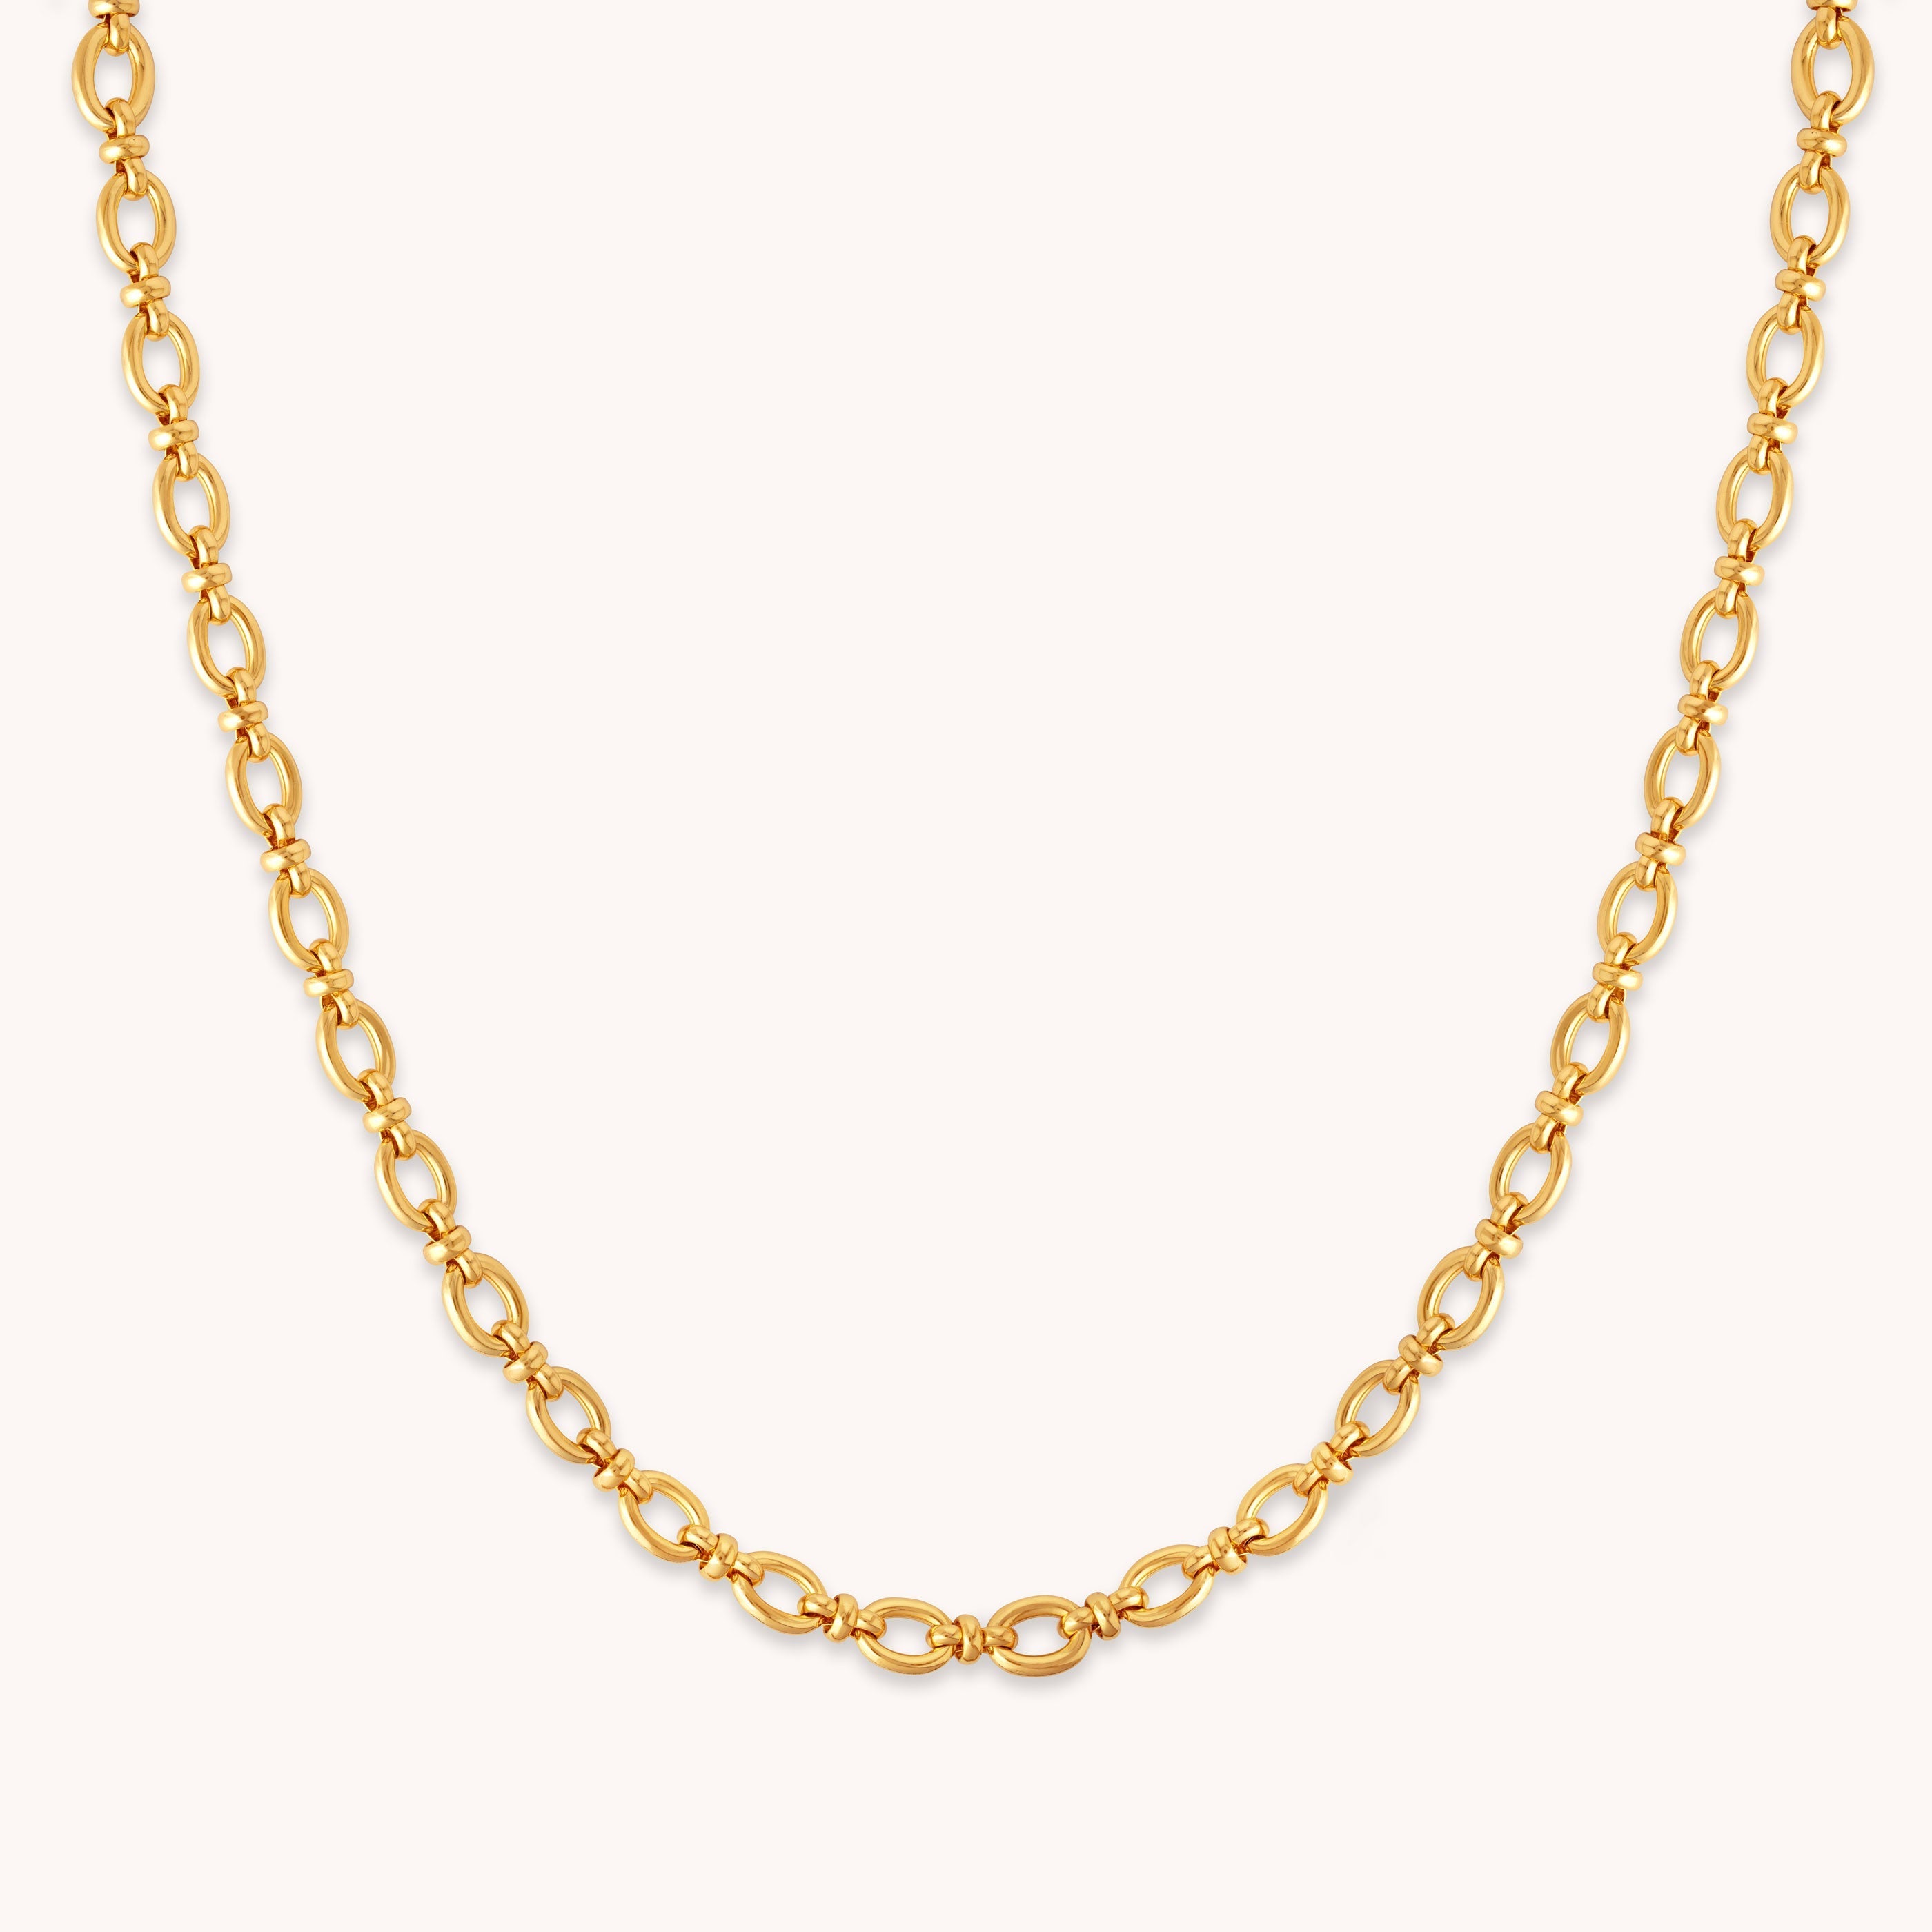 Gold Open Link Chain Necklace | Astrid & Miyu Necklaces